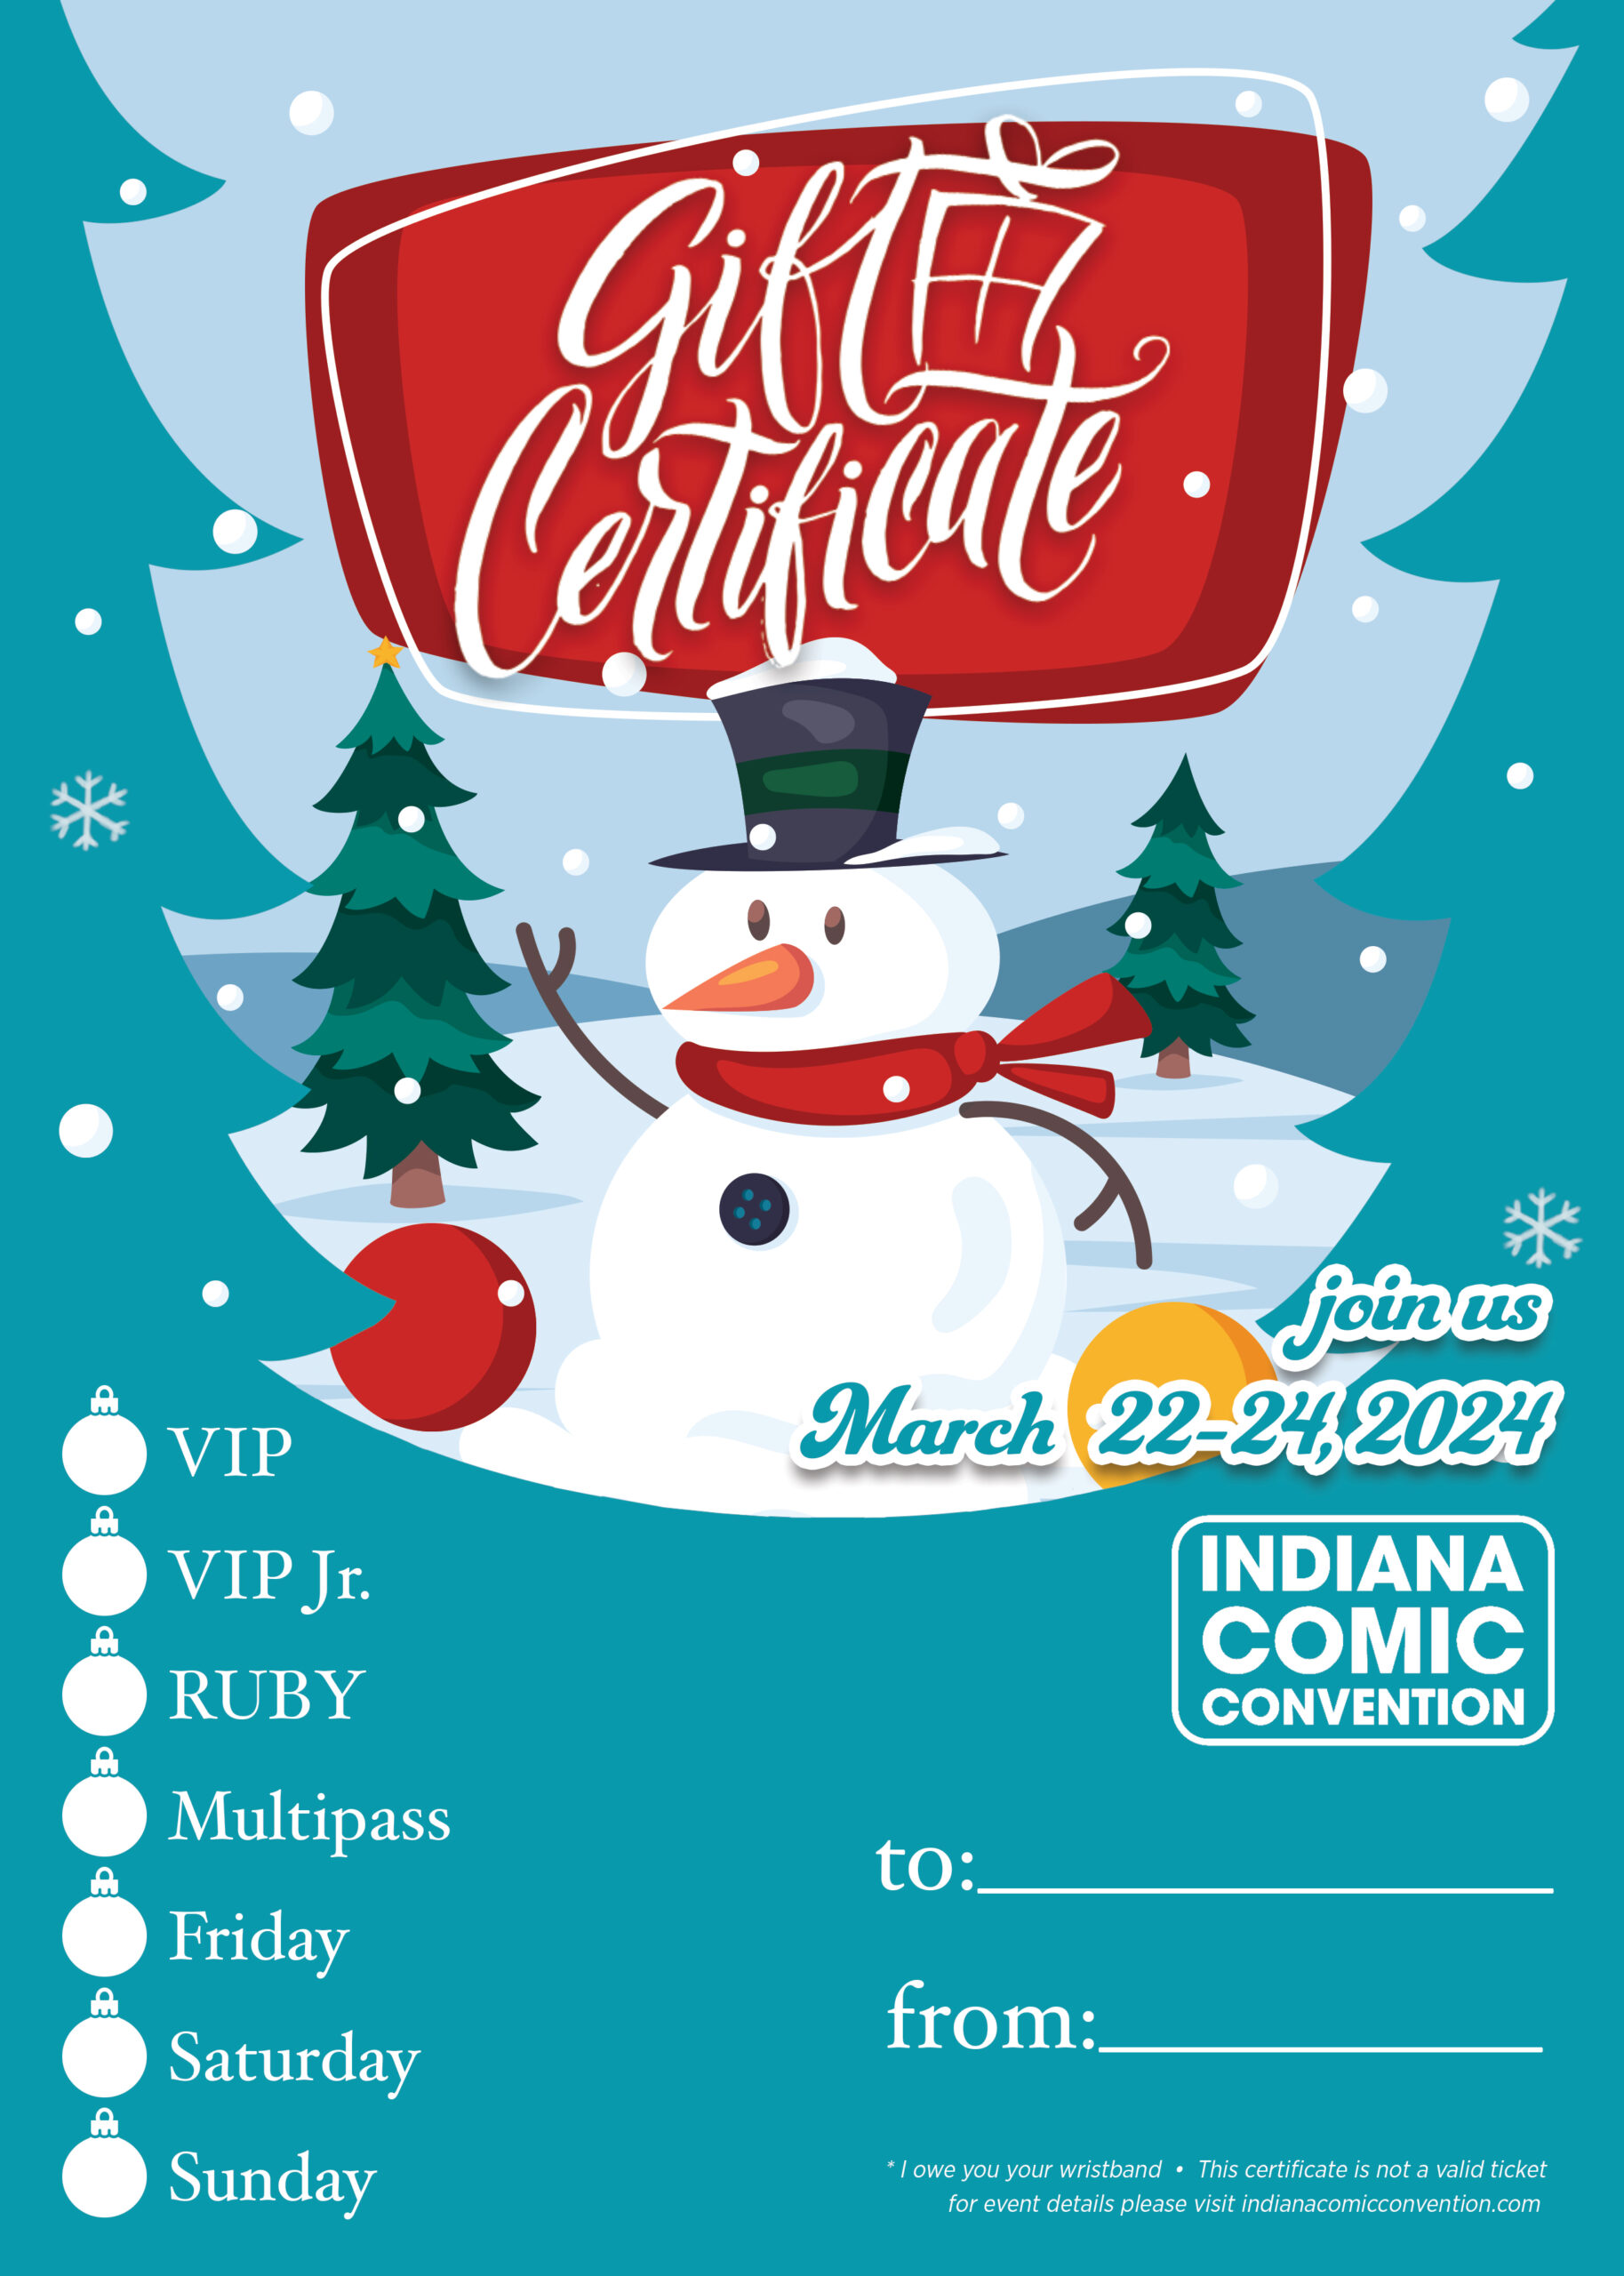 ICC Passes as Holiday Gifts with our Printable Gift Certificate!